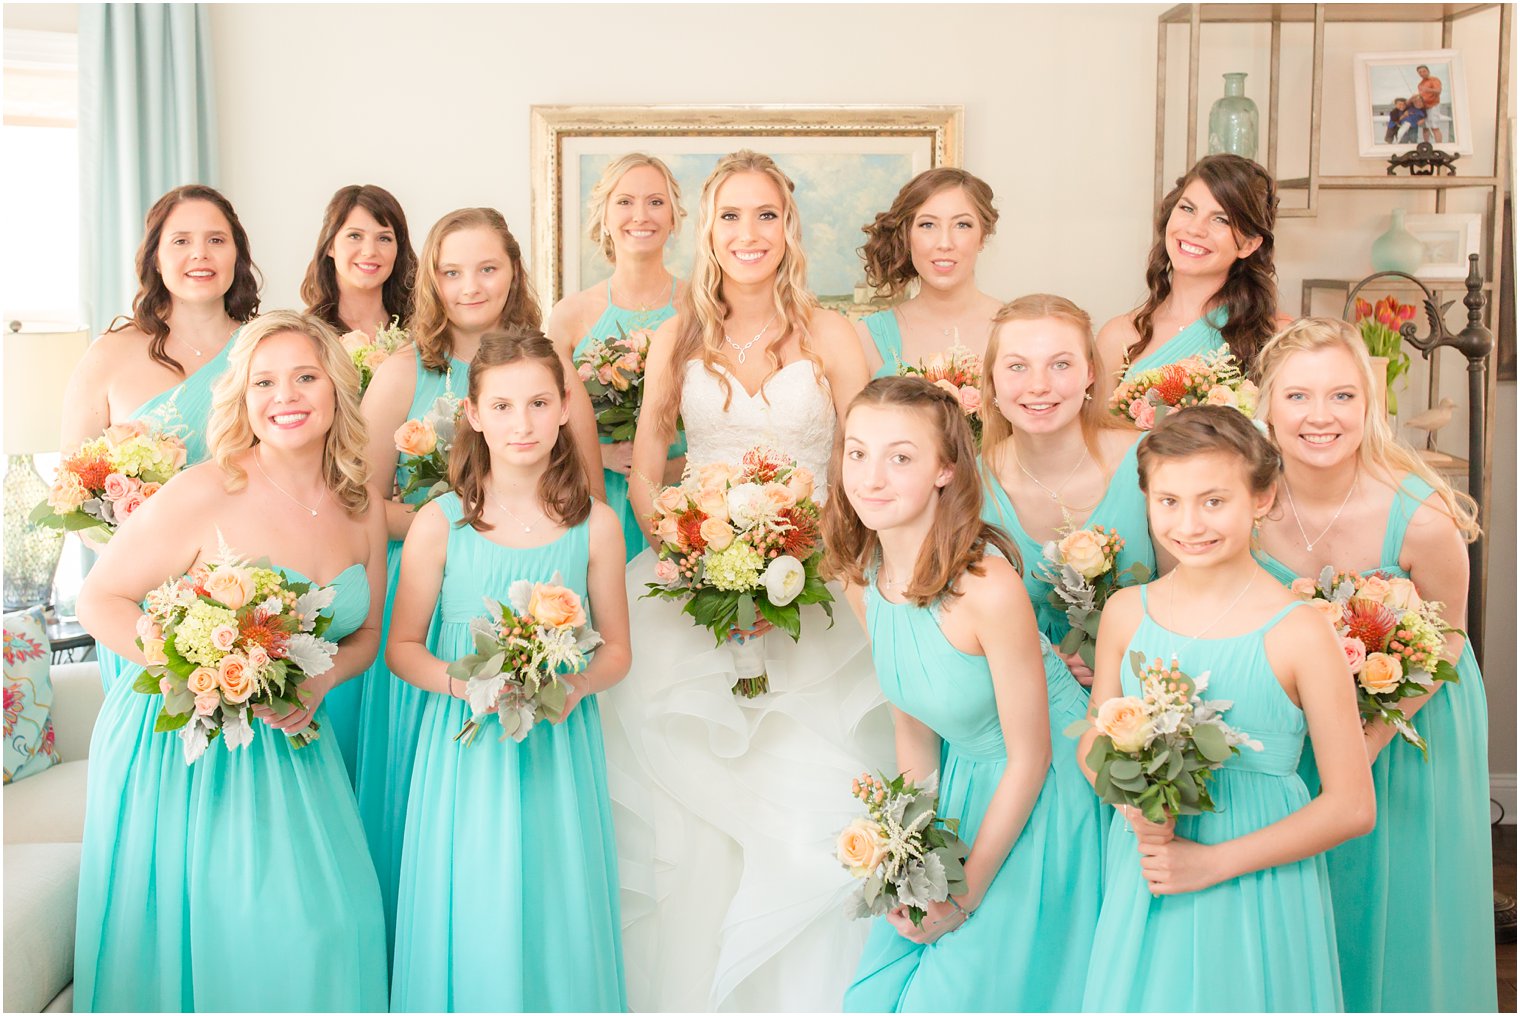 Bride with bridesmaids and junior bridesmaids wearing teal dresses